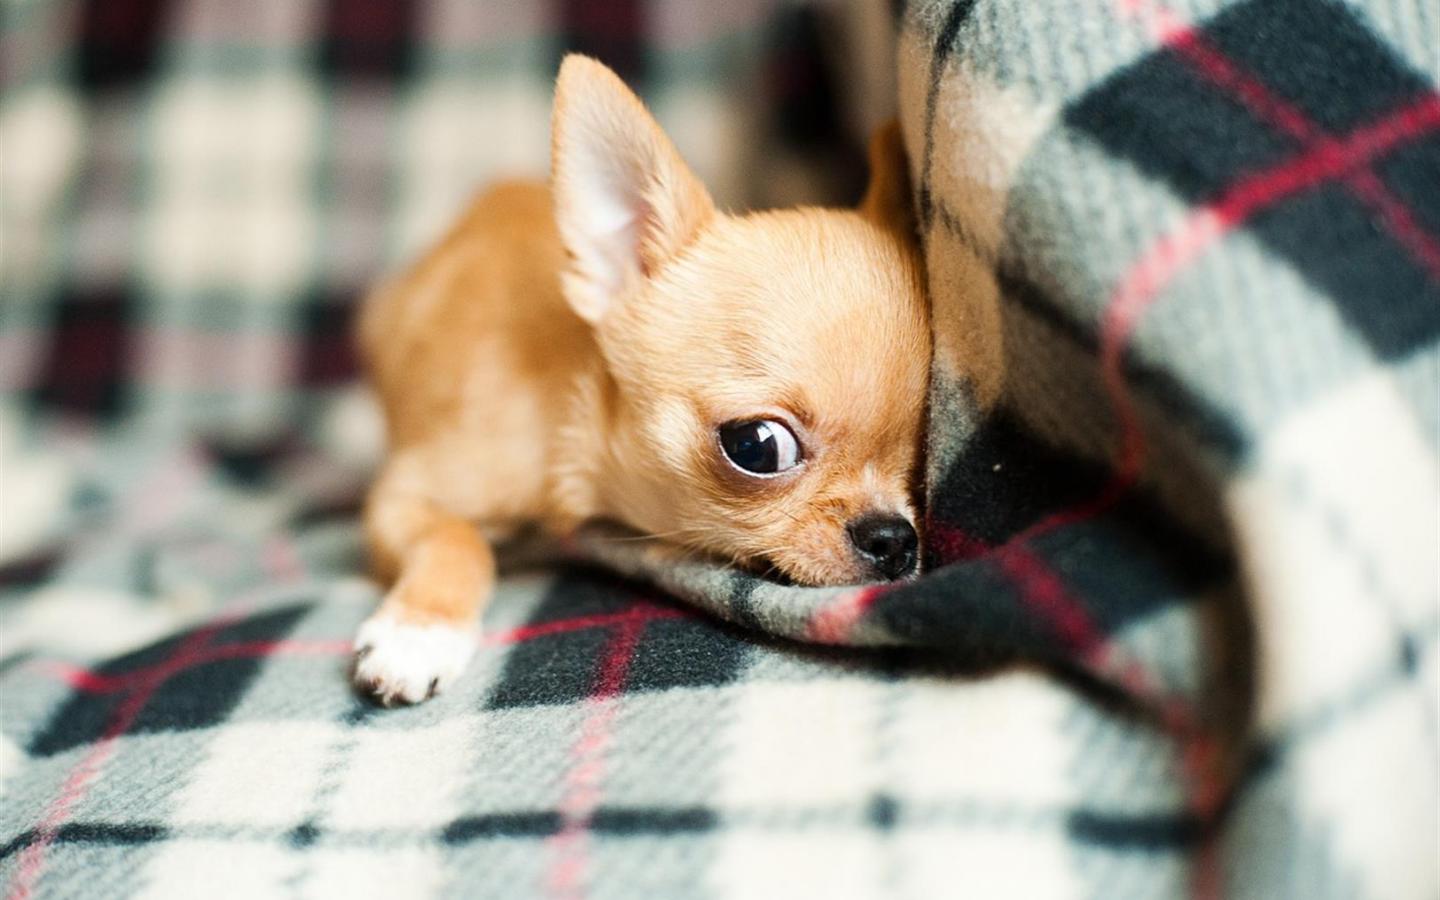 Cute Chihuahua Wallpapers - Wallpaper Cave